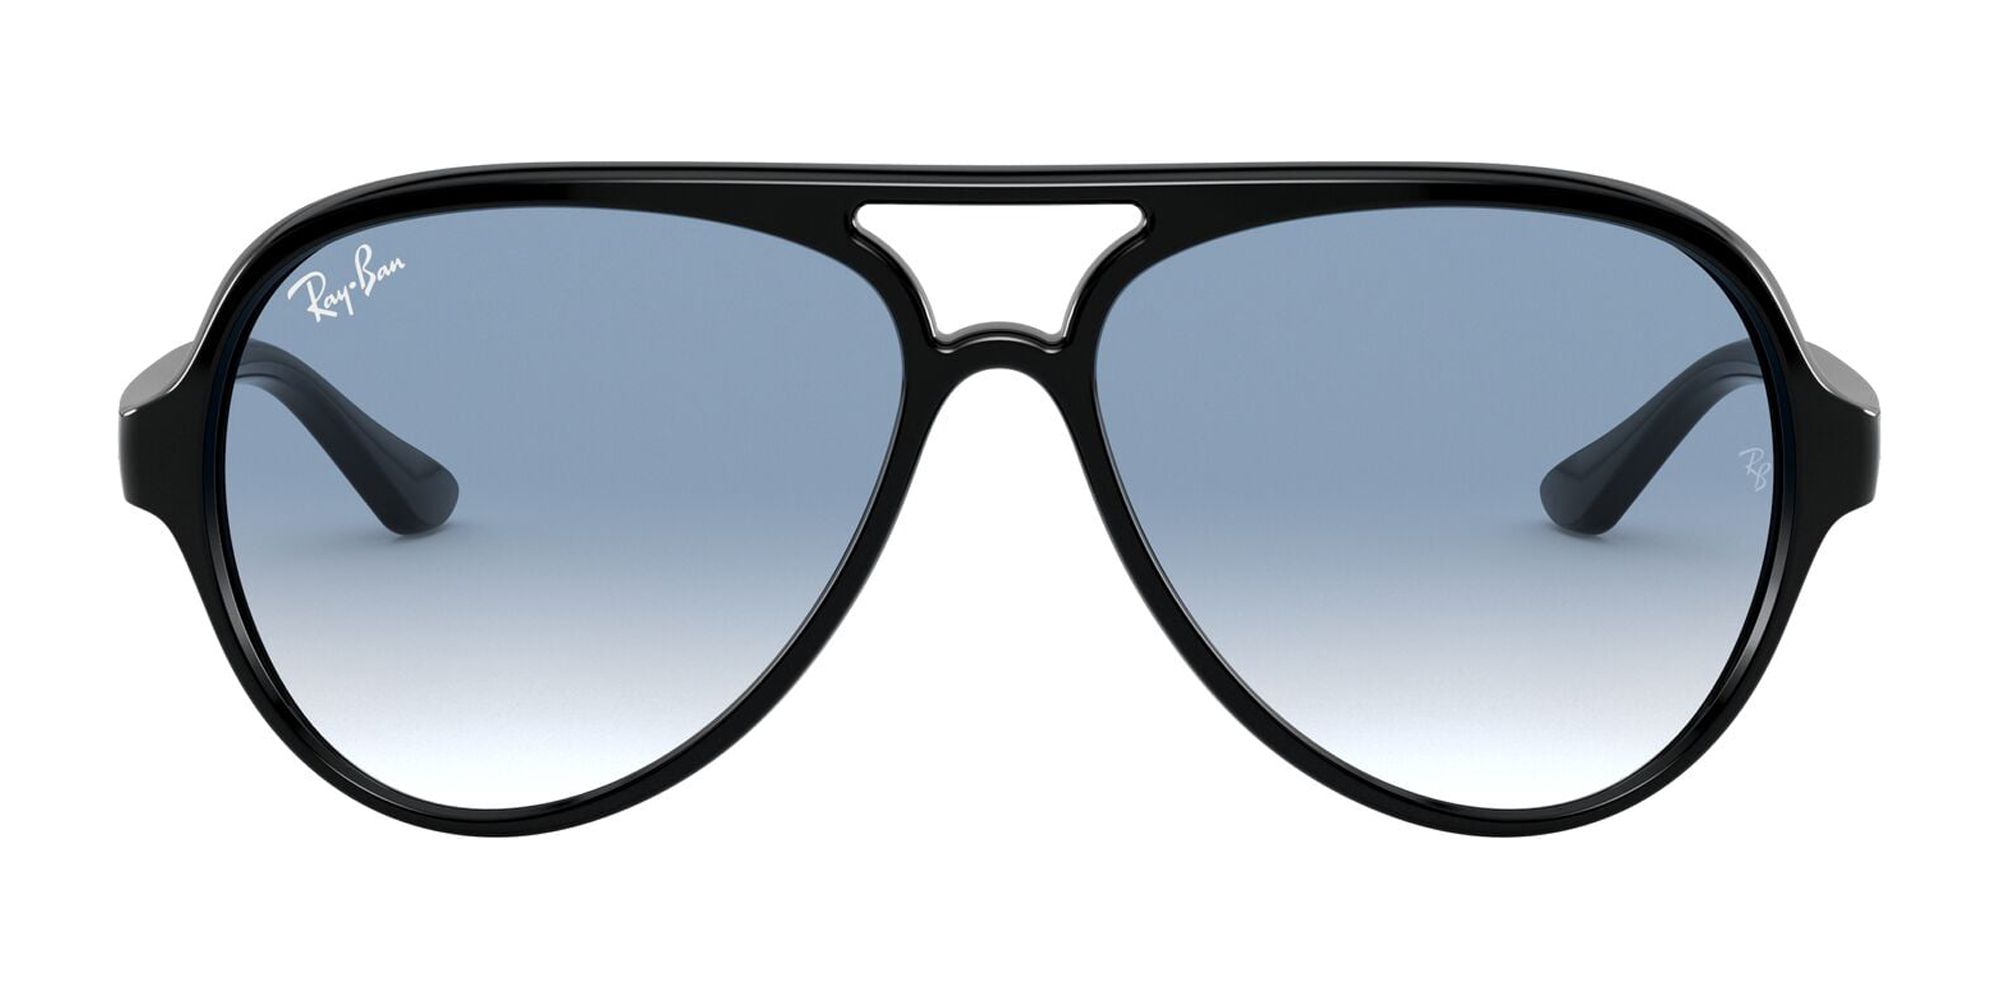 Ray-Ban RB4125 Cats 5000 Sunglasses - image 1 of 12